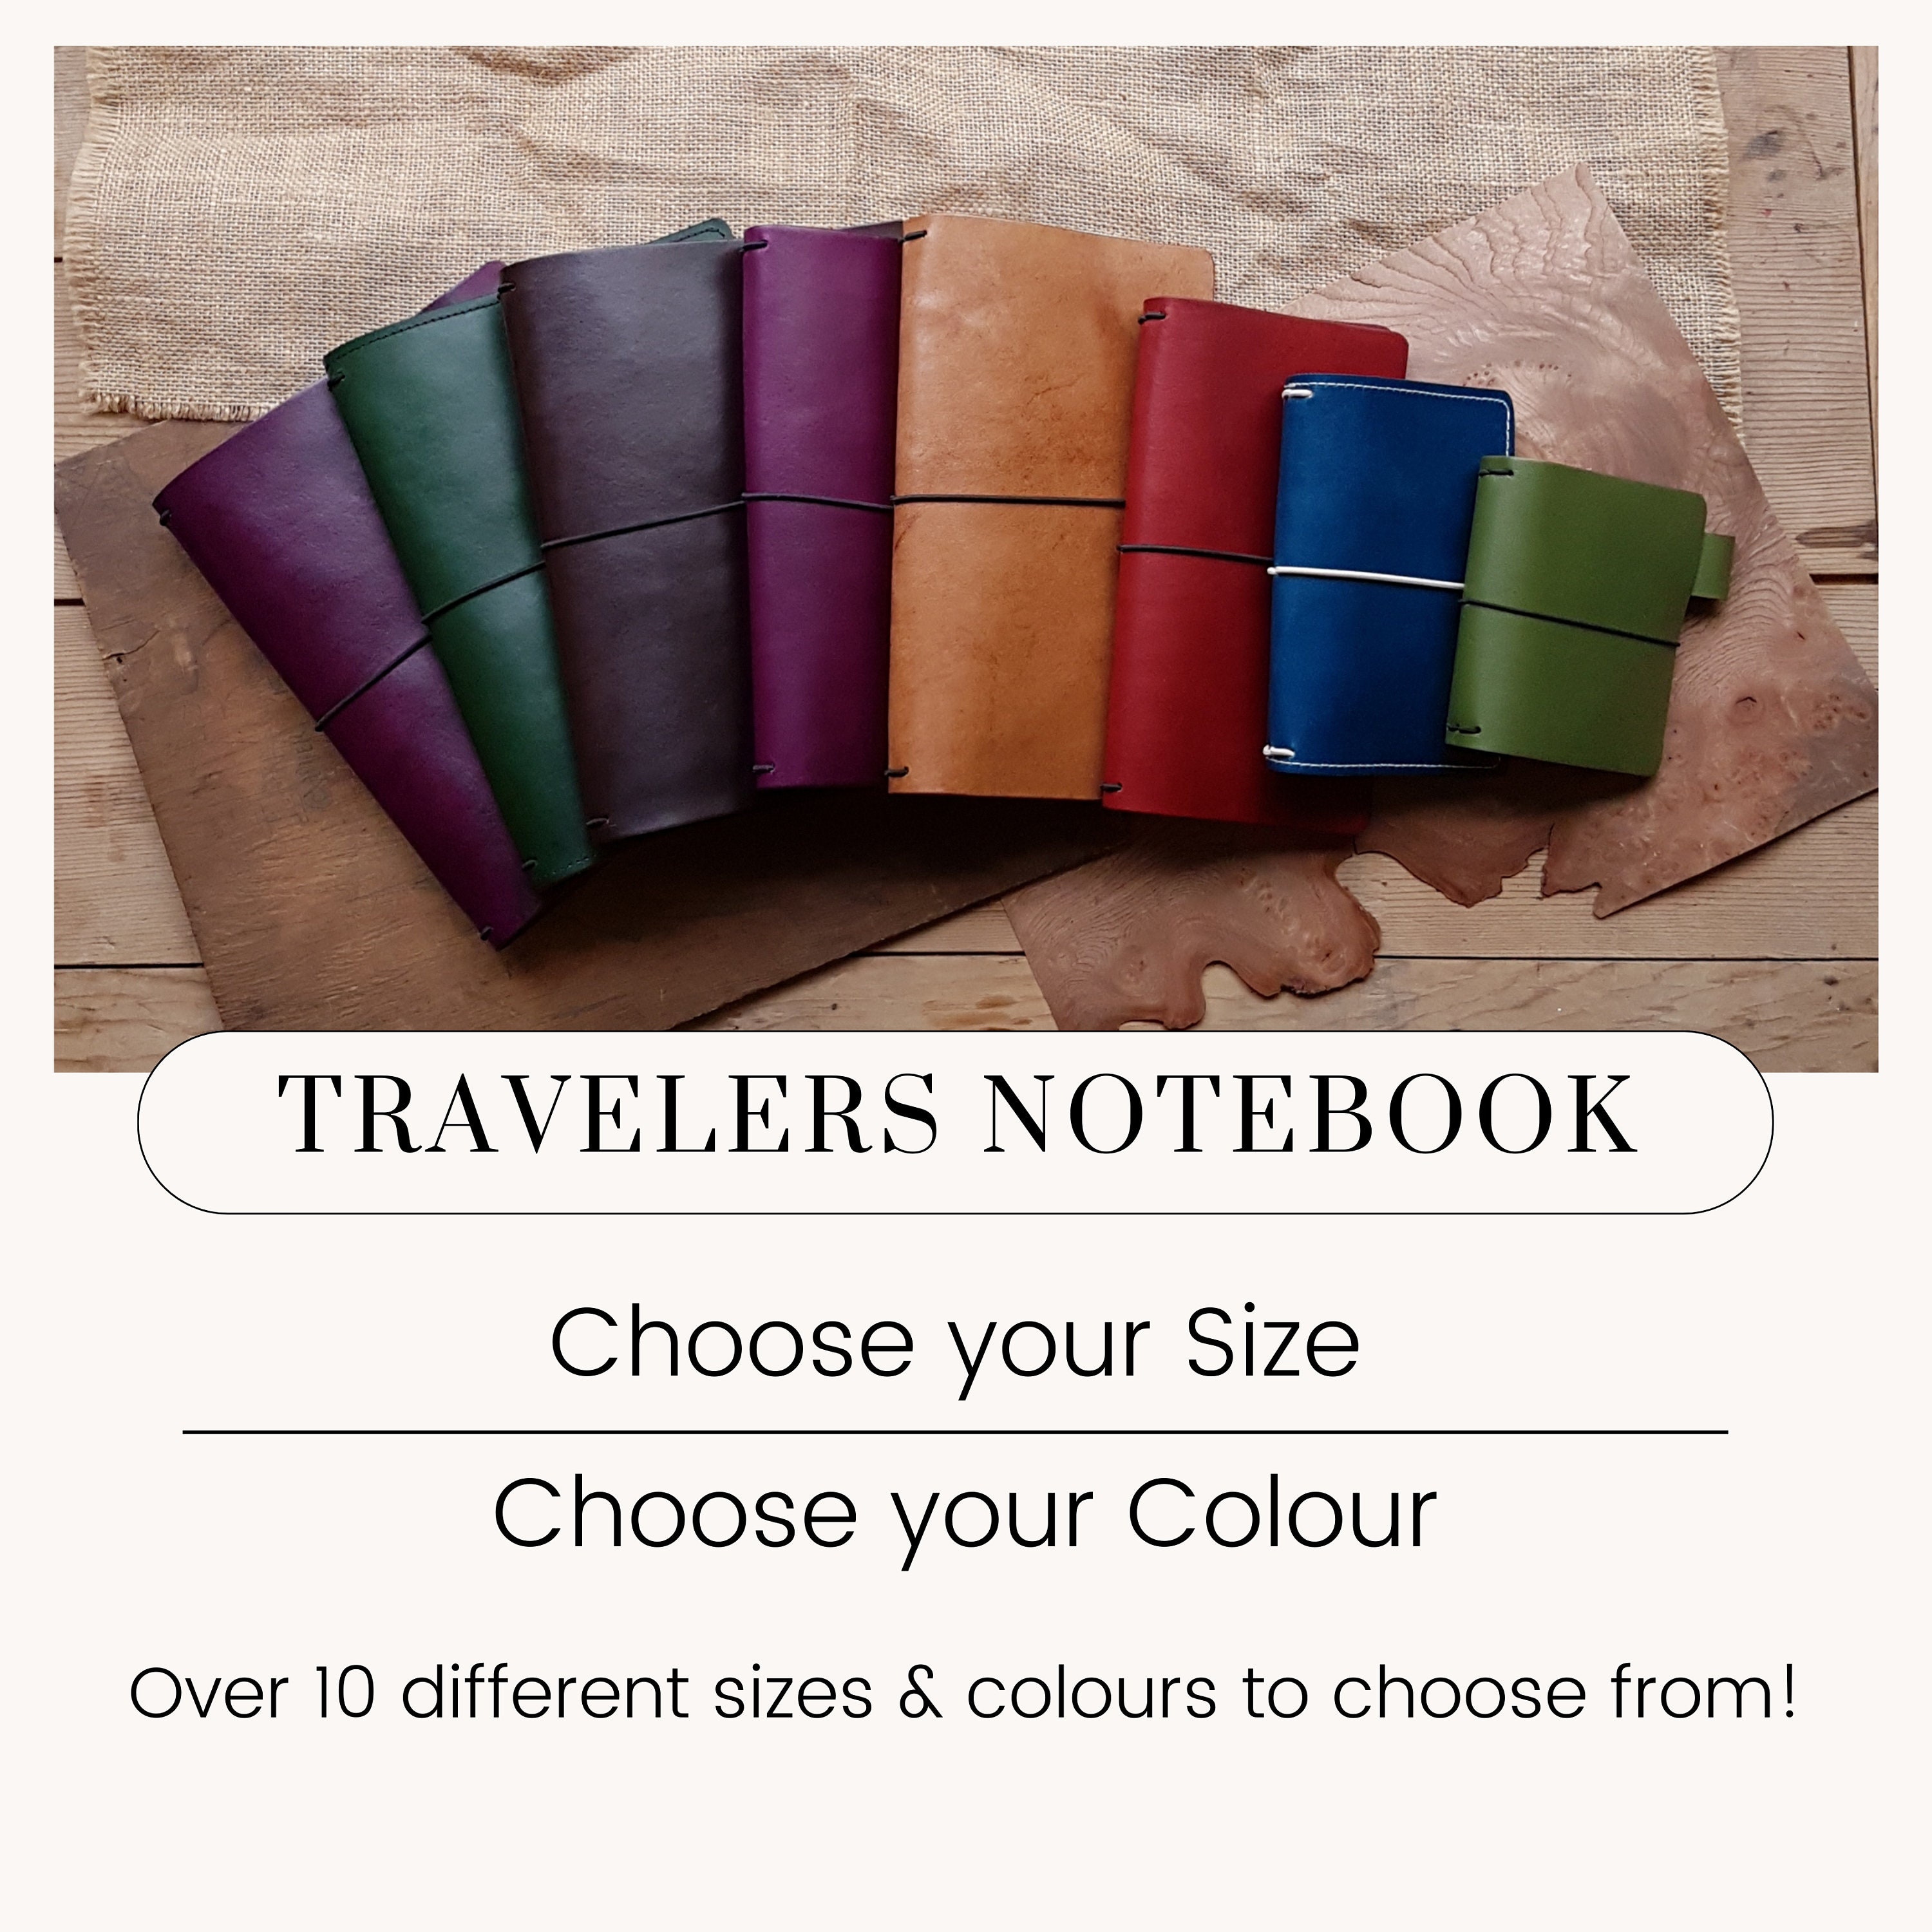 Dress Up Your Traveler's Notebook Inserts!